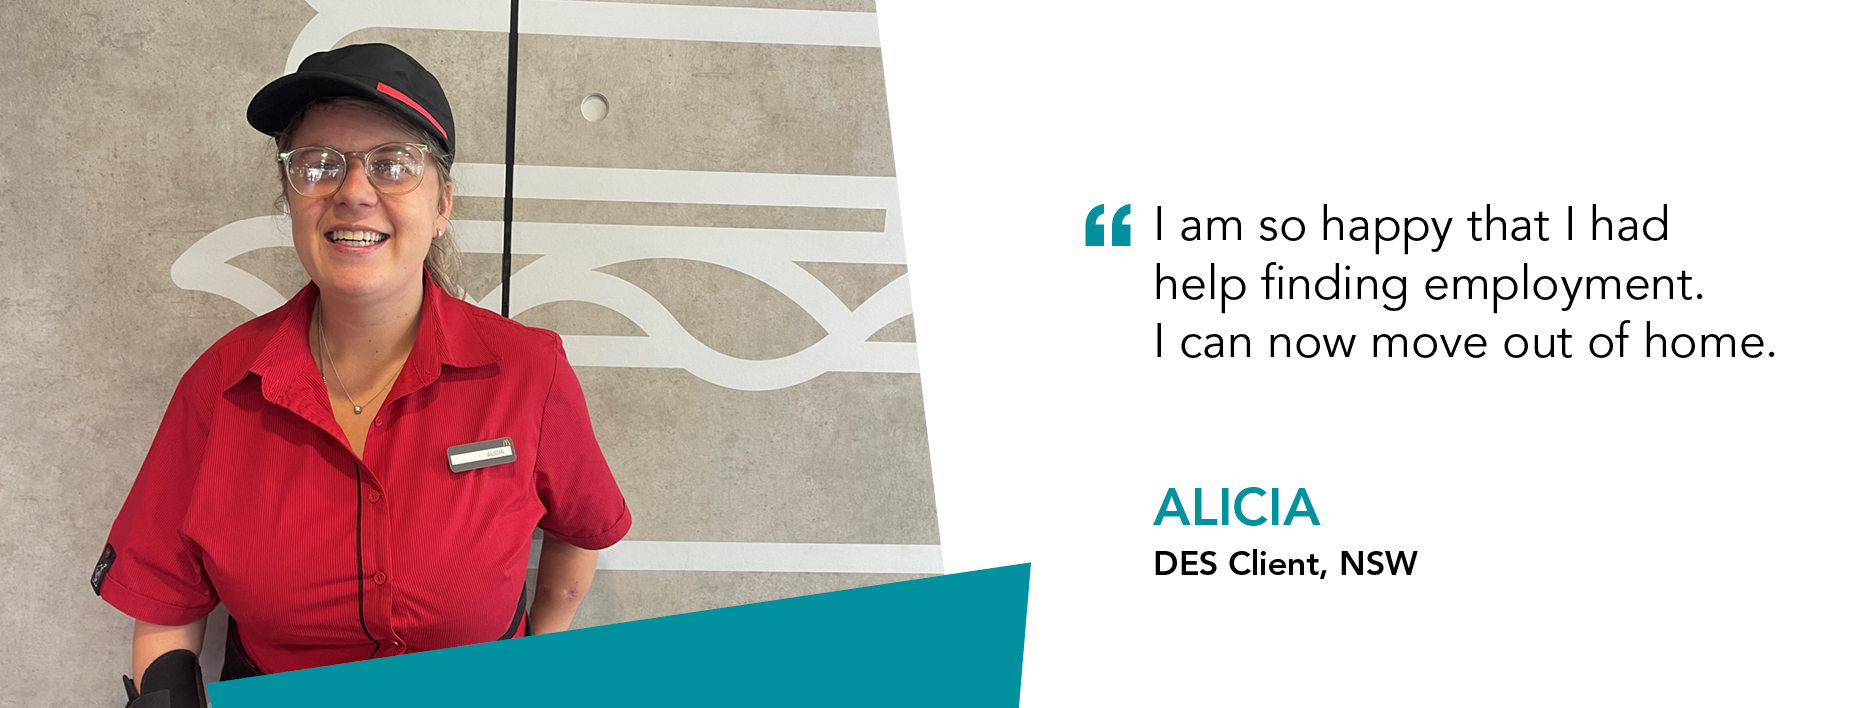 Quote reads "I am so happy that I had help finding employment. I can now move out of home." Alicia DES Client New South Wales